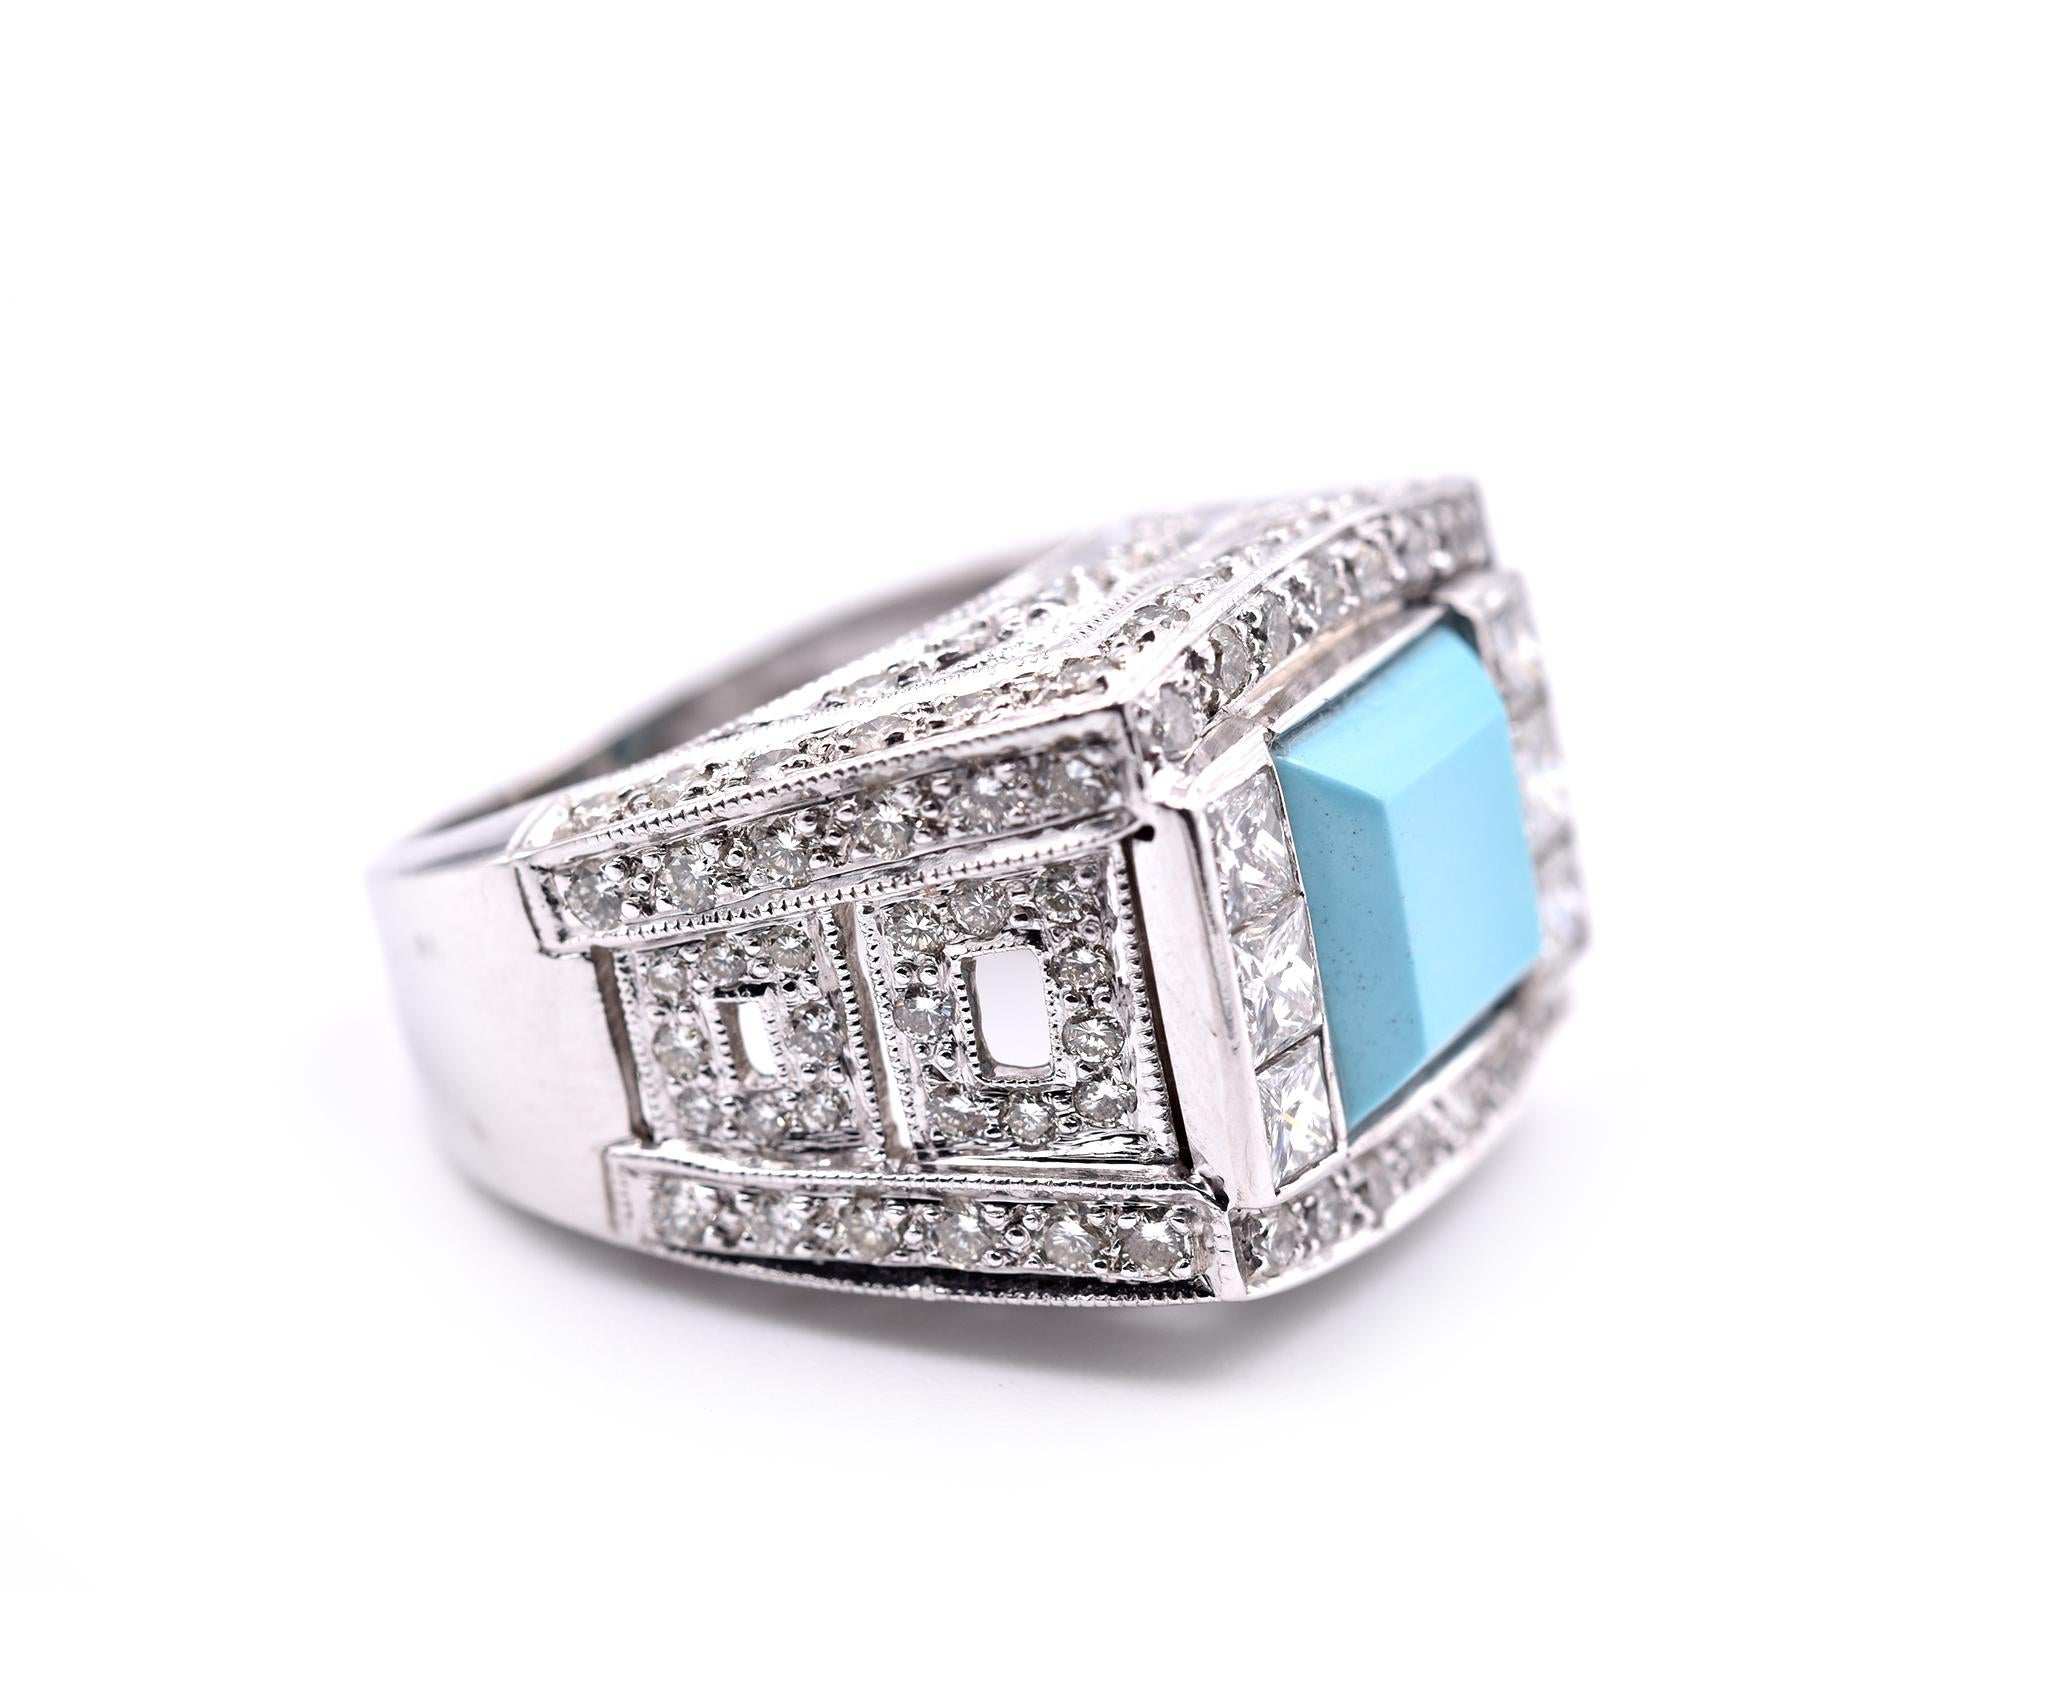 Designer: custom design
Material: 14k white gold
Diamonds: 120 round brilliant cuts = 2.00cttw
Color: G
Clarity: VS
Diamonds: 6 princess cuts = 1.02cttw
Color: G
Clarity: VS
Ring size: 7 ¼ (please allow two additional shipping days for sizing